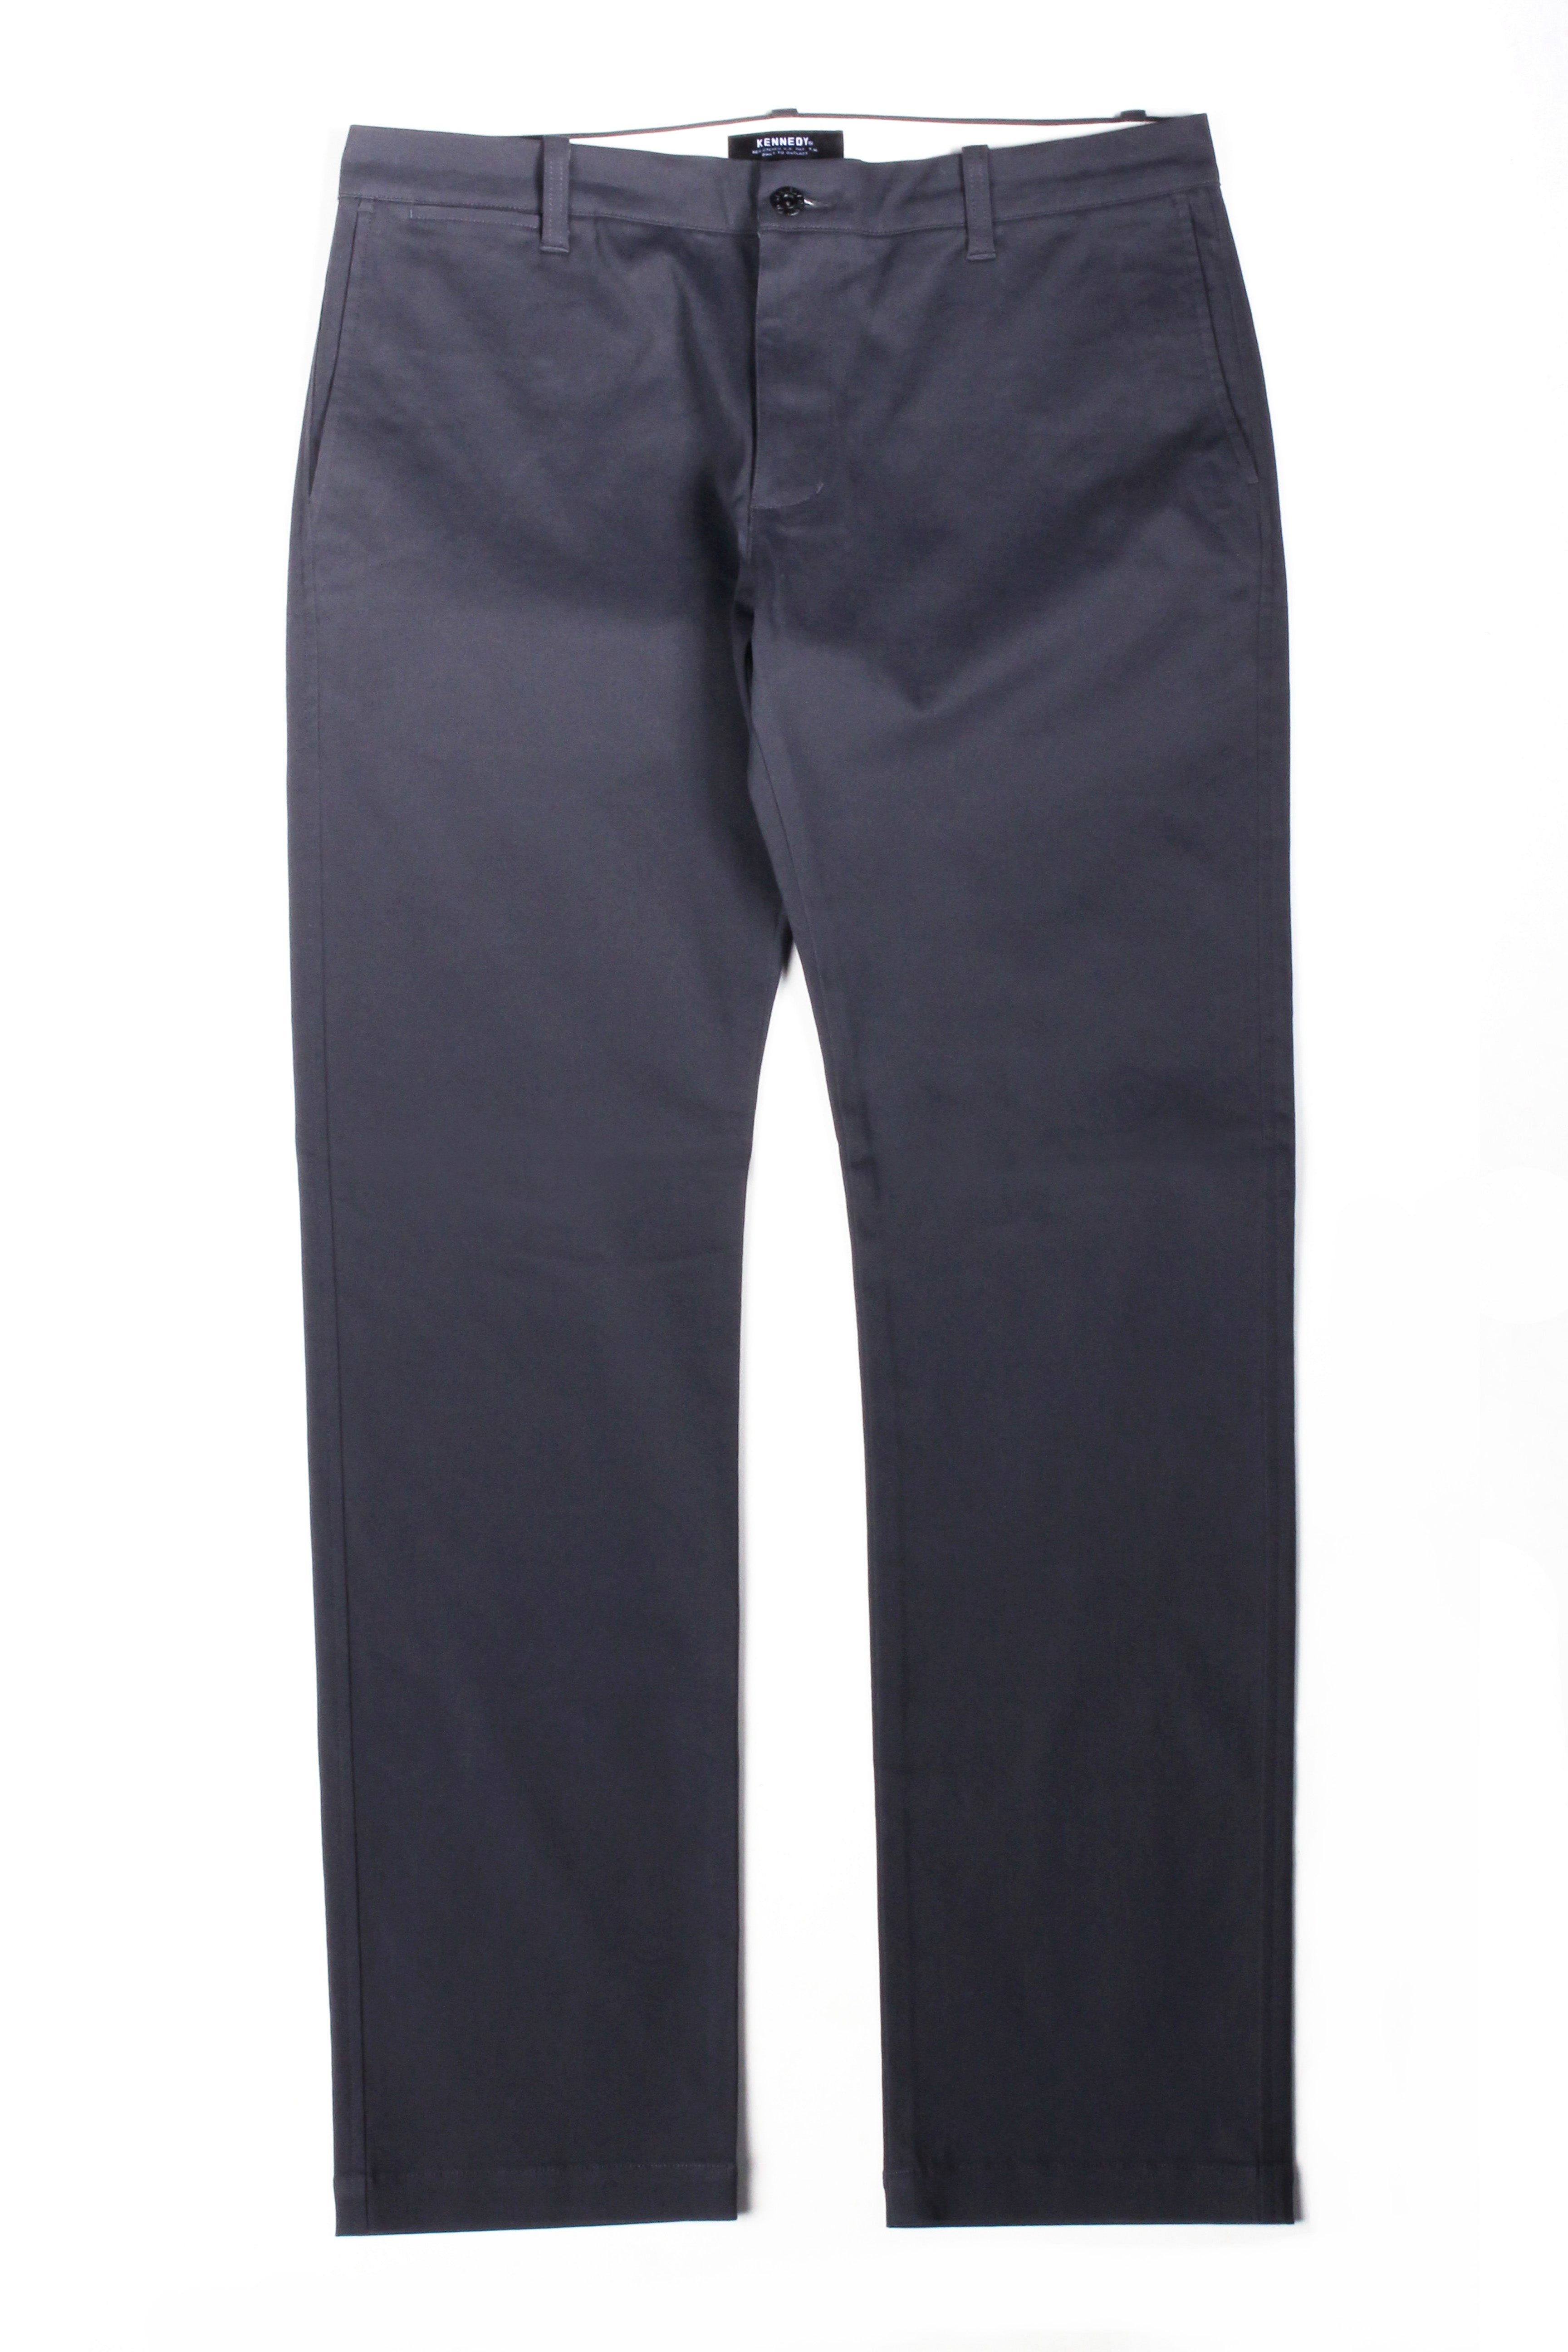 The New Surplus Chino Pant - Slate | KENNEDY MFG. CO